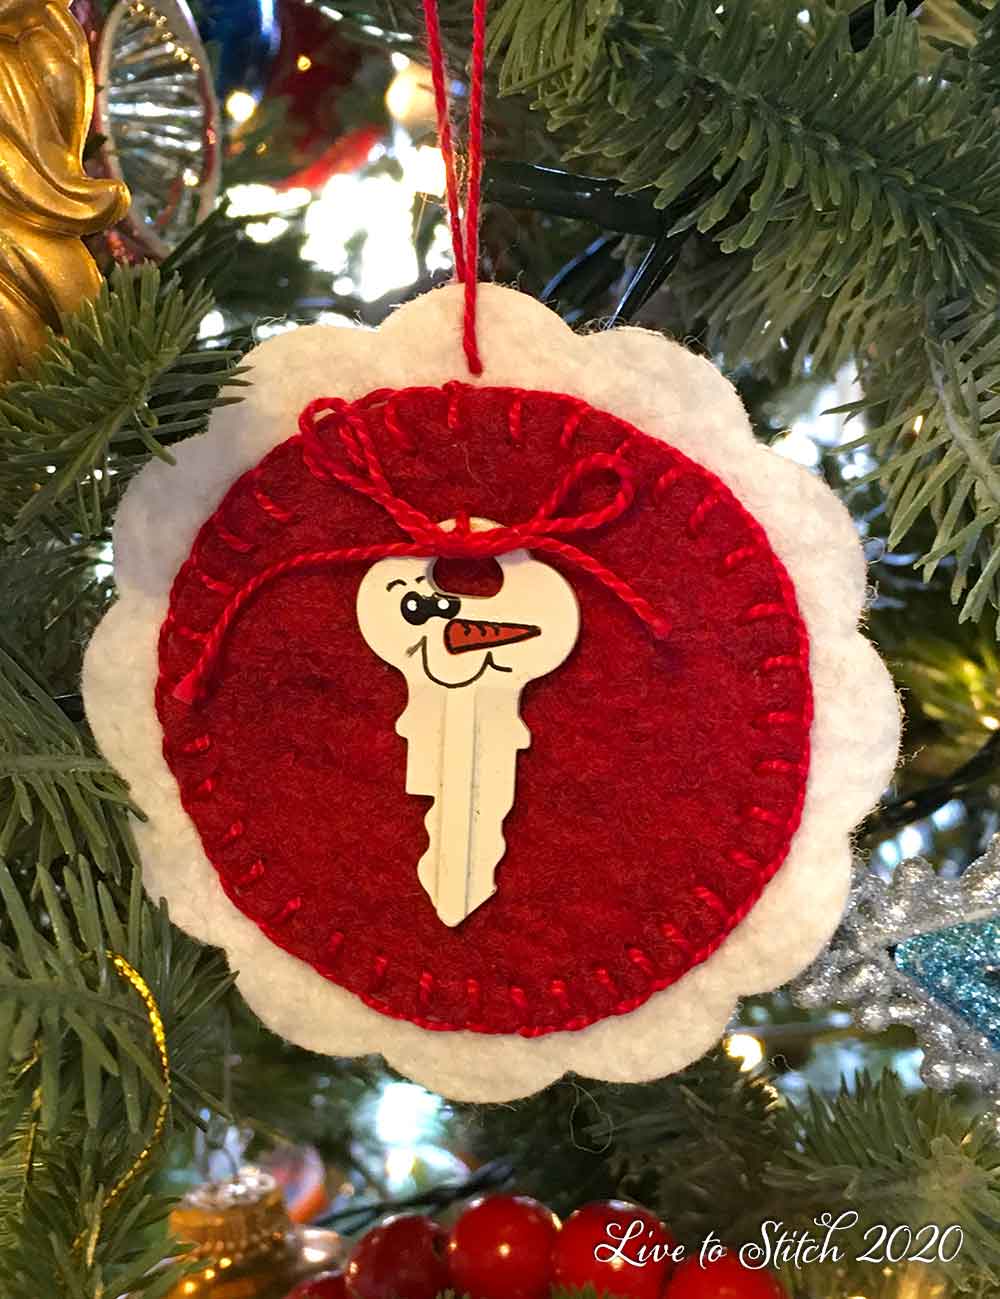 Blanket-stitched felt ornament with key